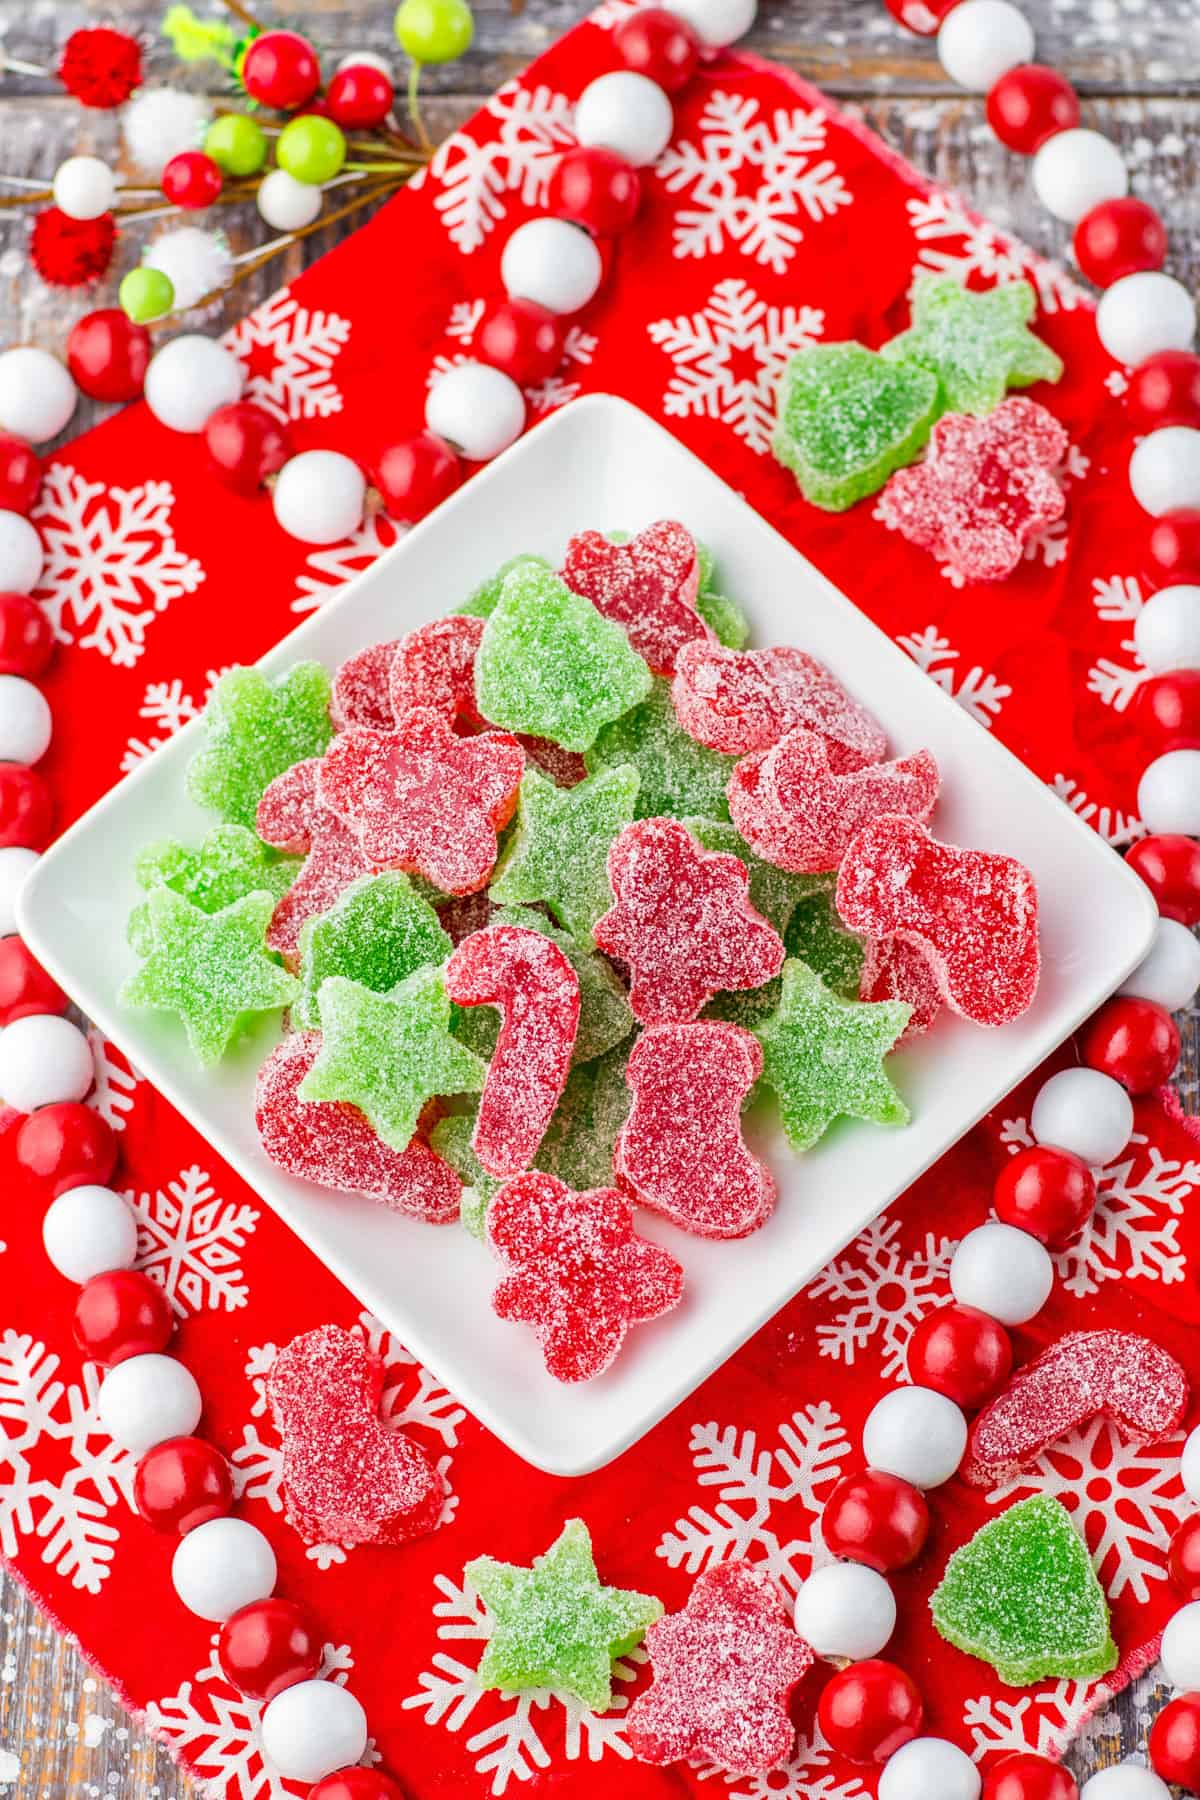 Christmas gumdrop candy on a square white plate surrounded by red and white holiday decor and additional gumdrop candies.